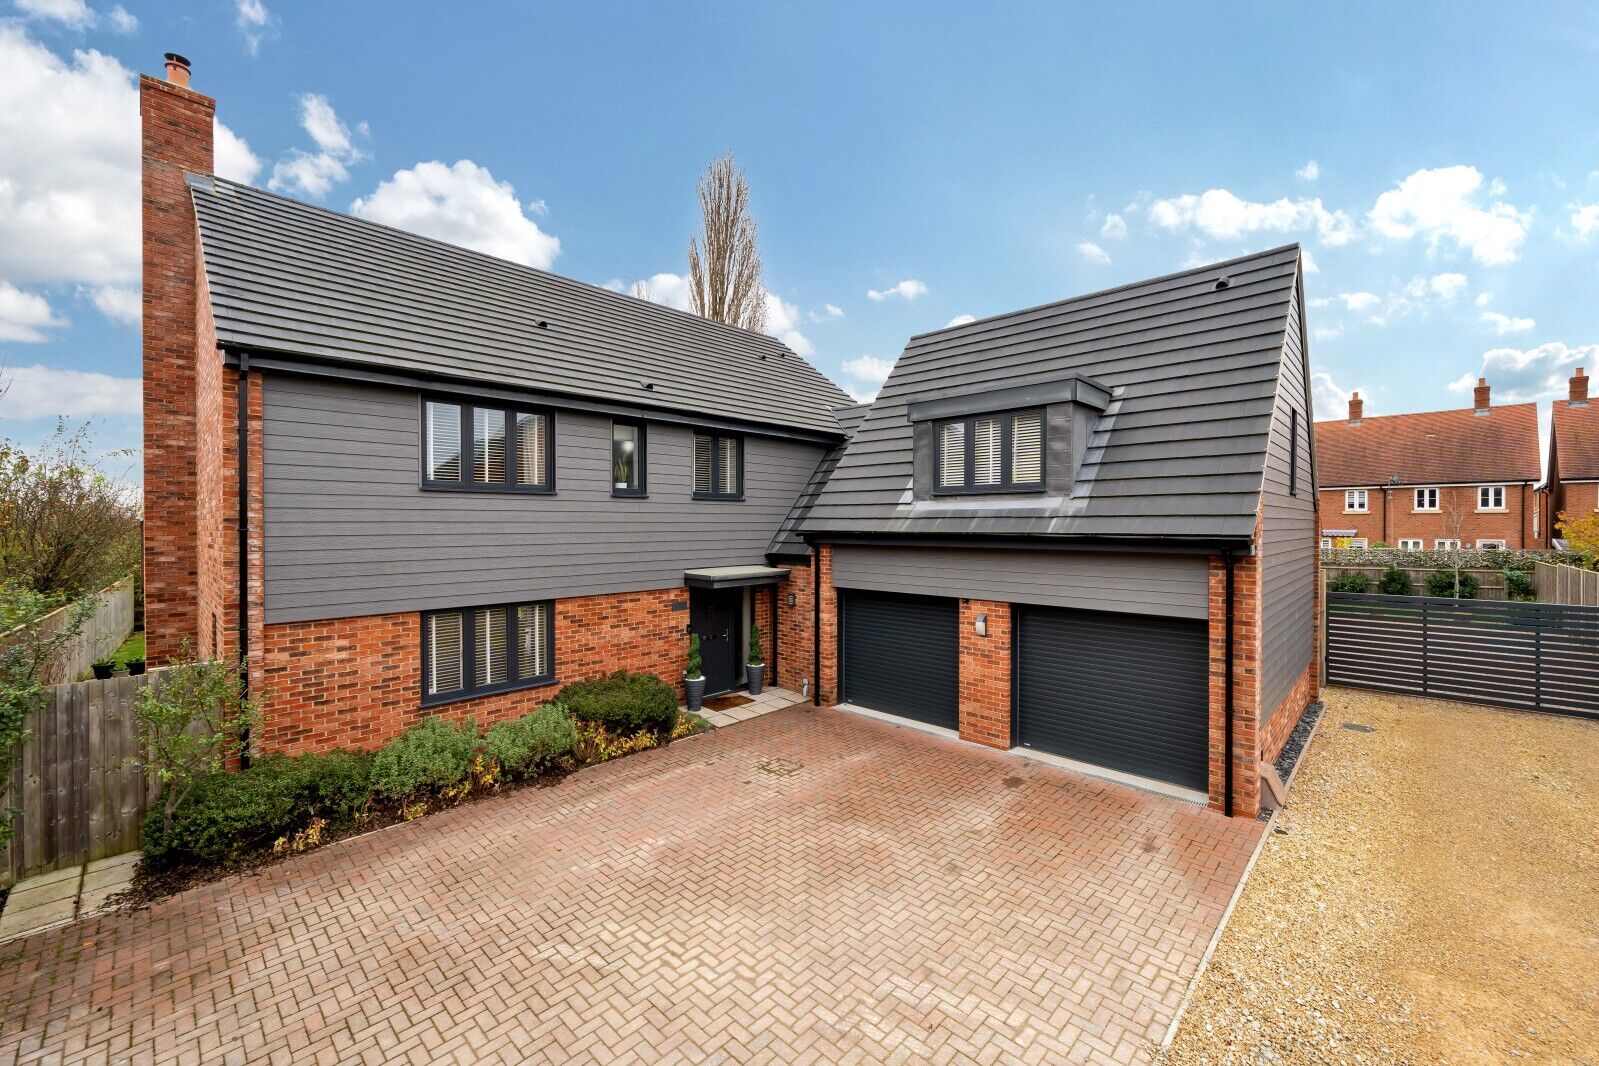 5 bedroom detached house for sale Red Kite Close, Sutton Courtenay, OX14, main image